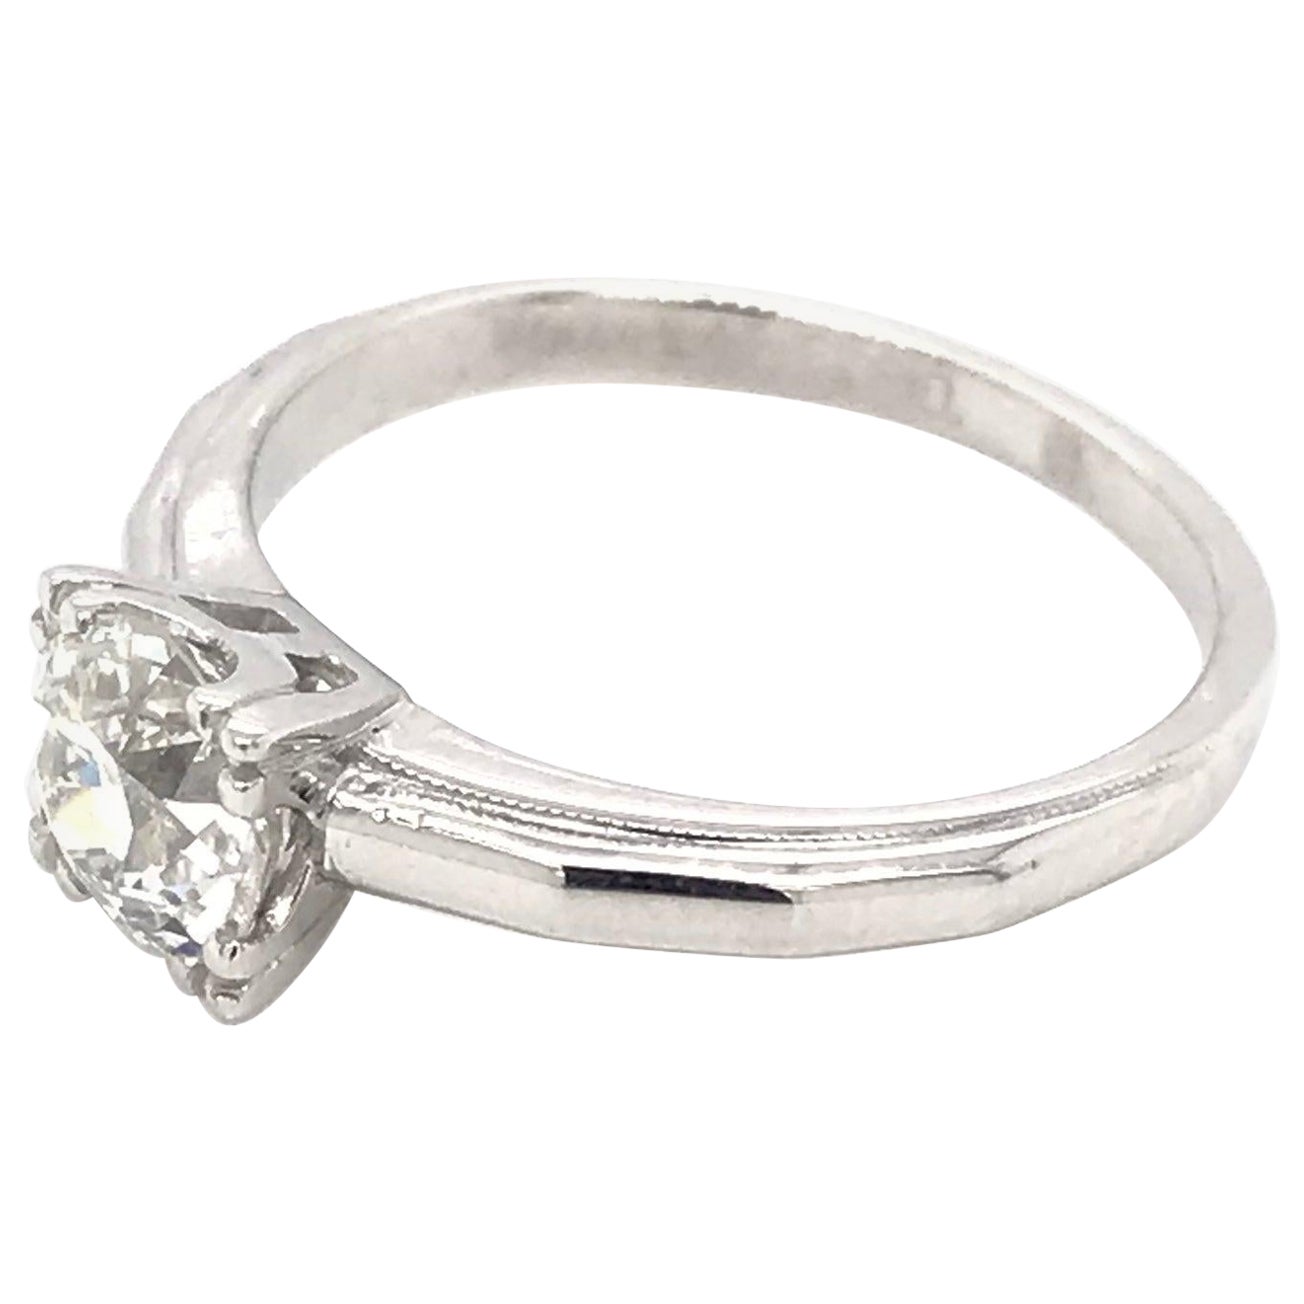 0.88 Old Mine Cut Diamond and Platinum Solitaire Style Ring